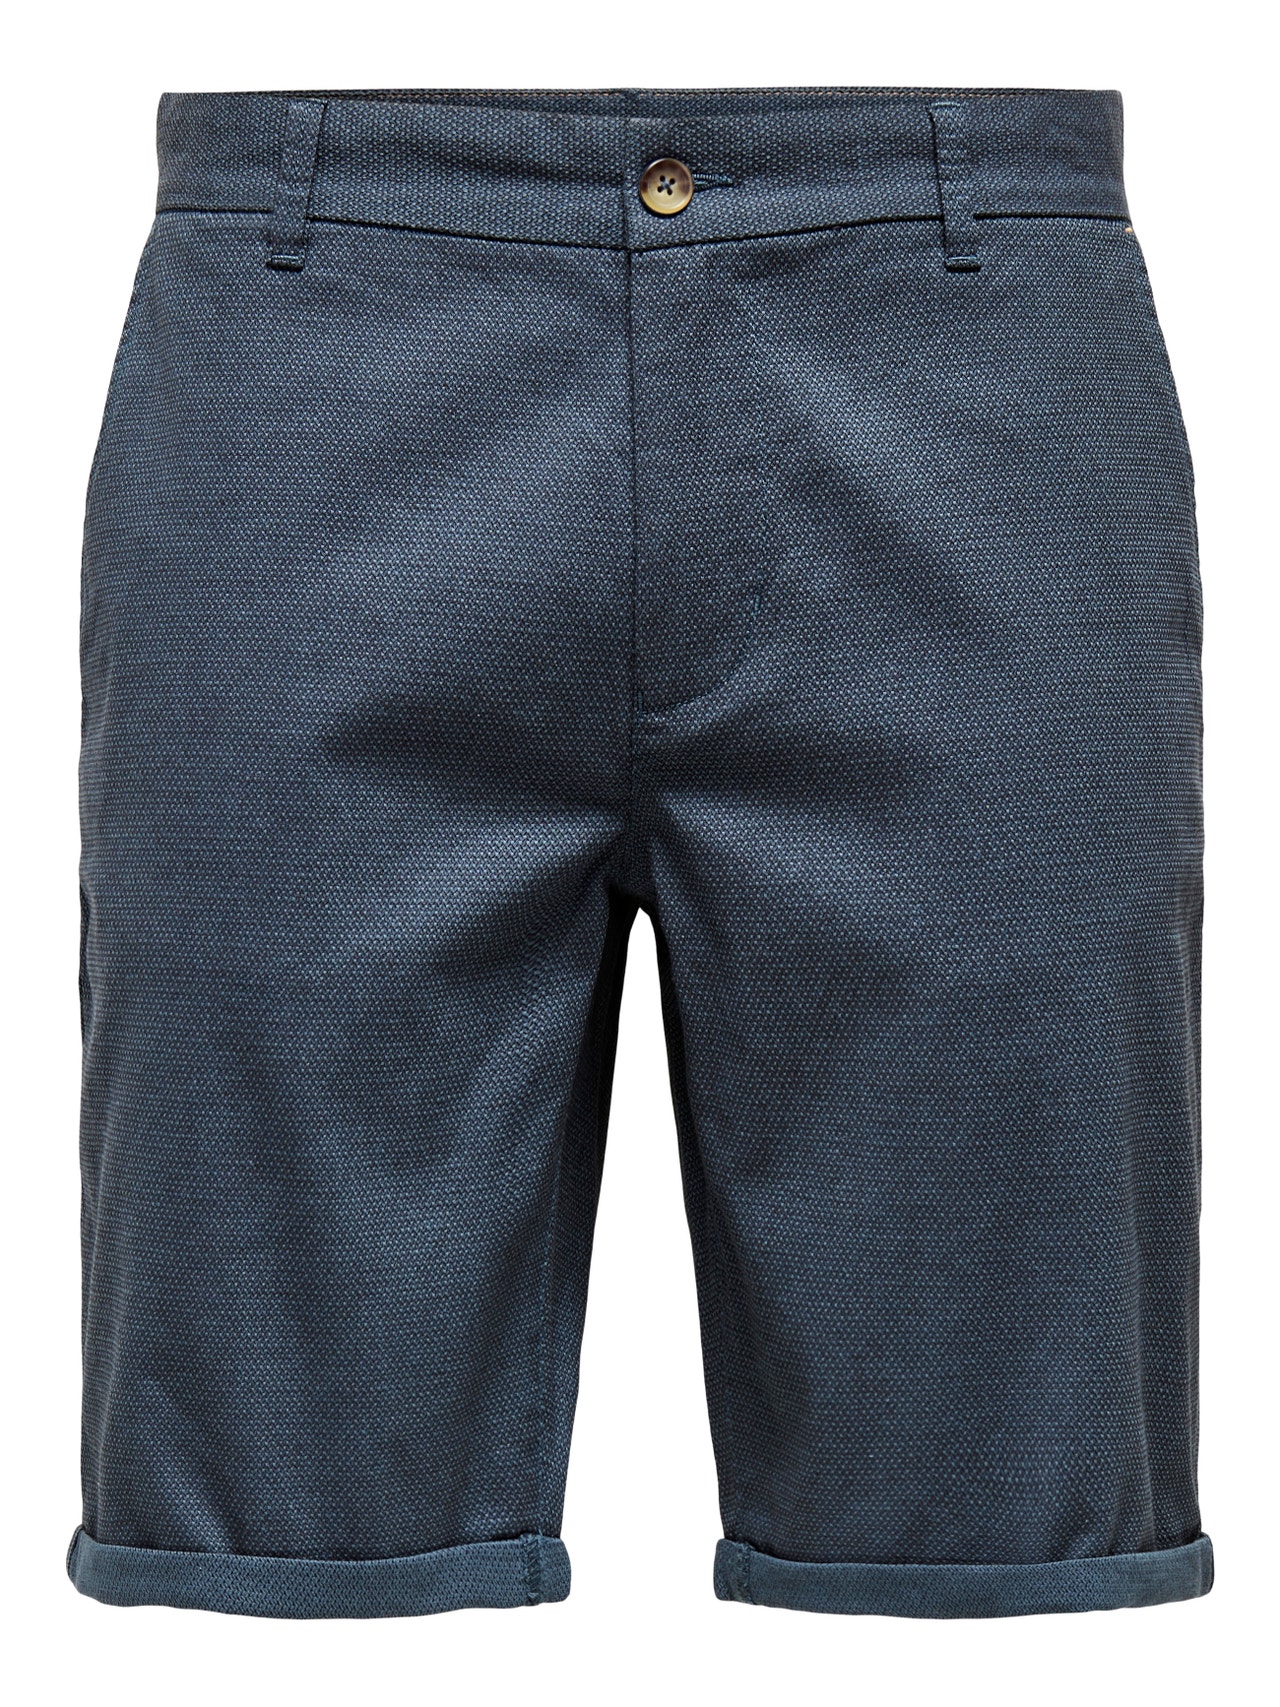 ONLY & SONS Shorts with roll up -Bering Sea - 22028336